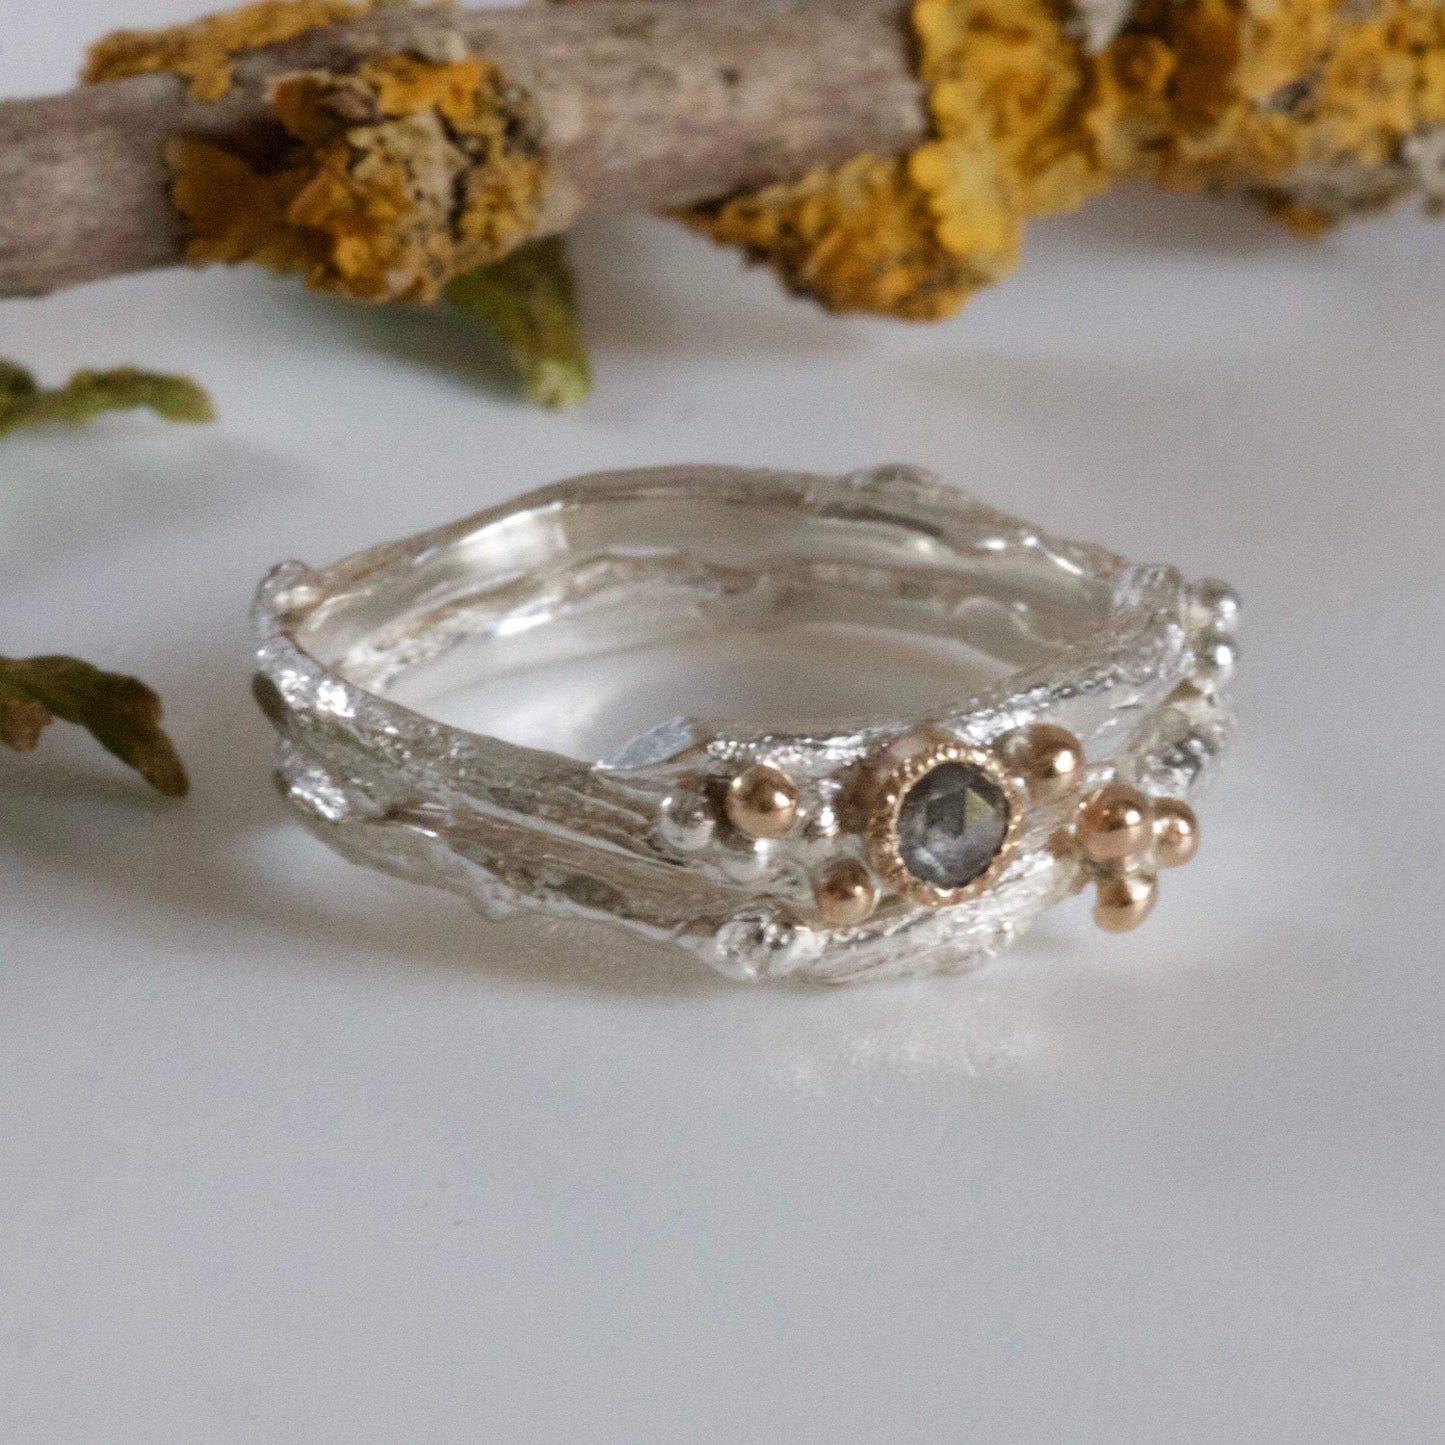 Silver and Gold Twig and Berry Shaped Wedding Ring, Rustic Wedding Ring